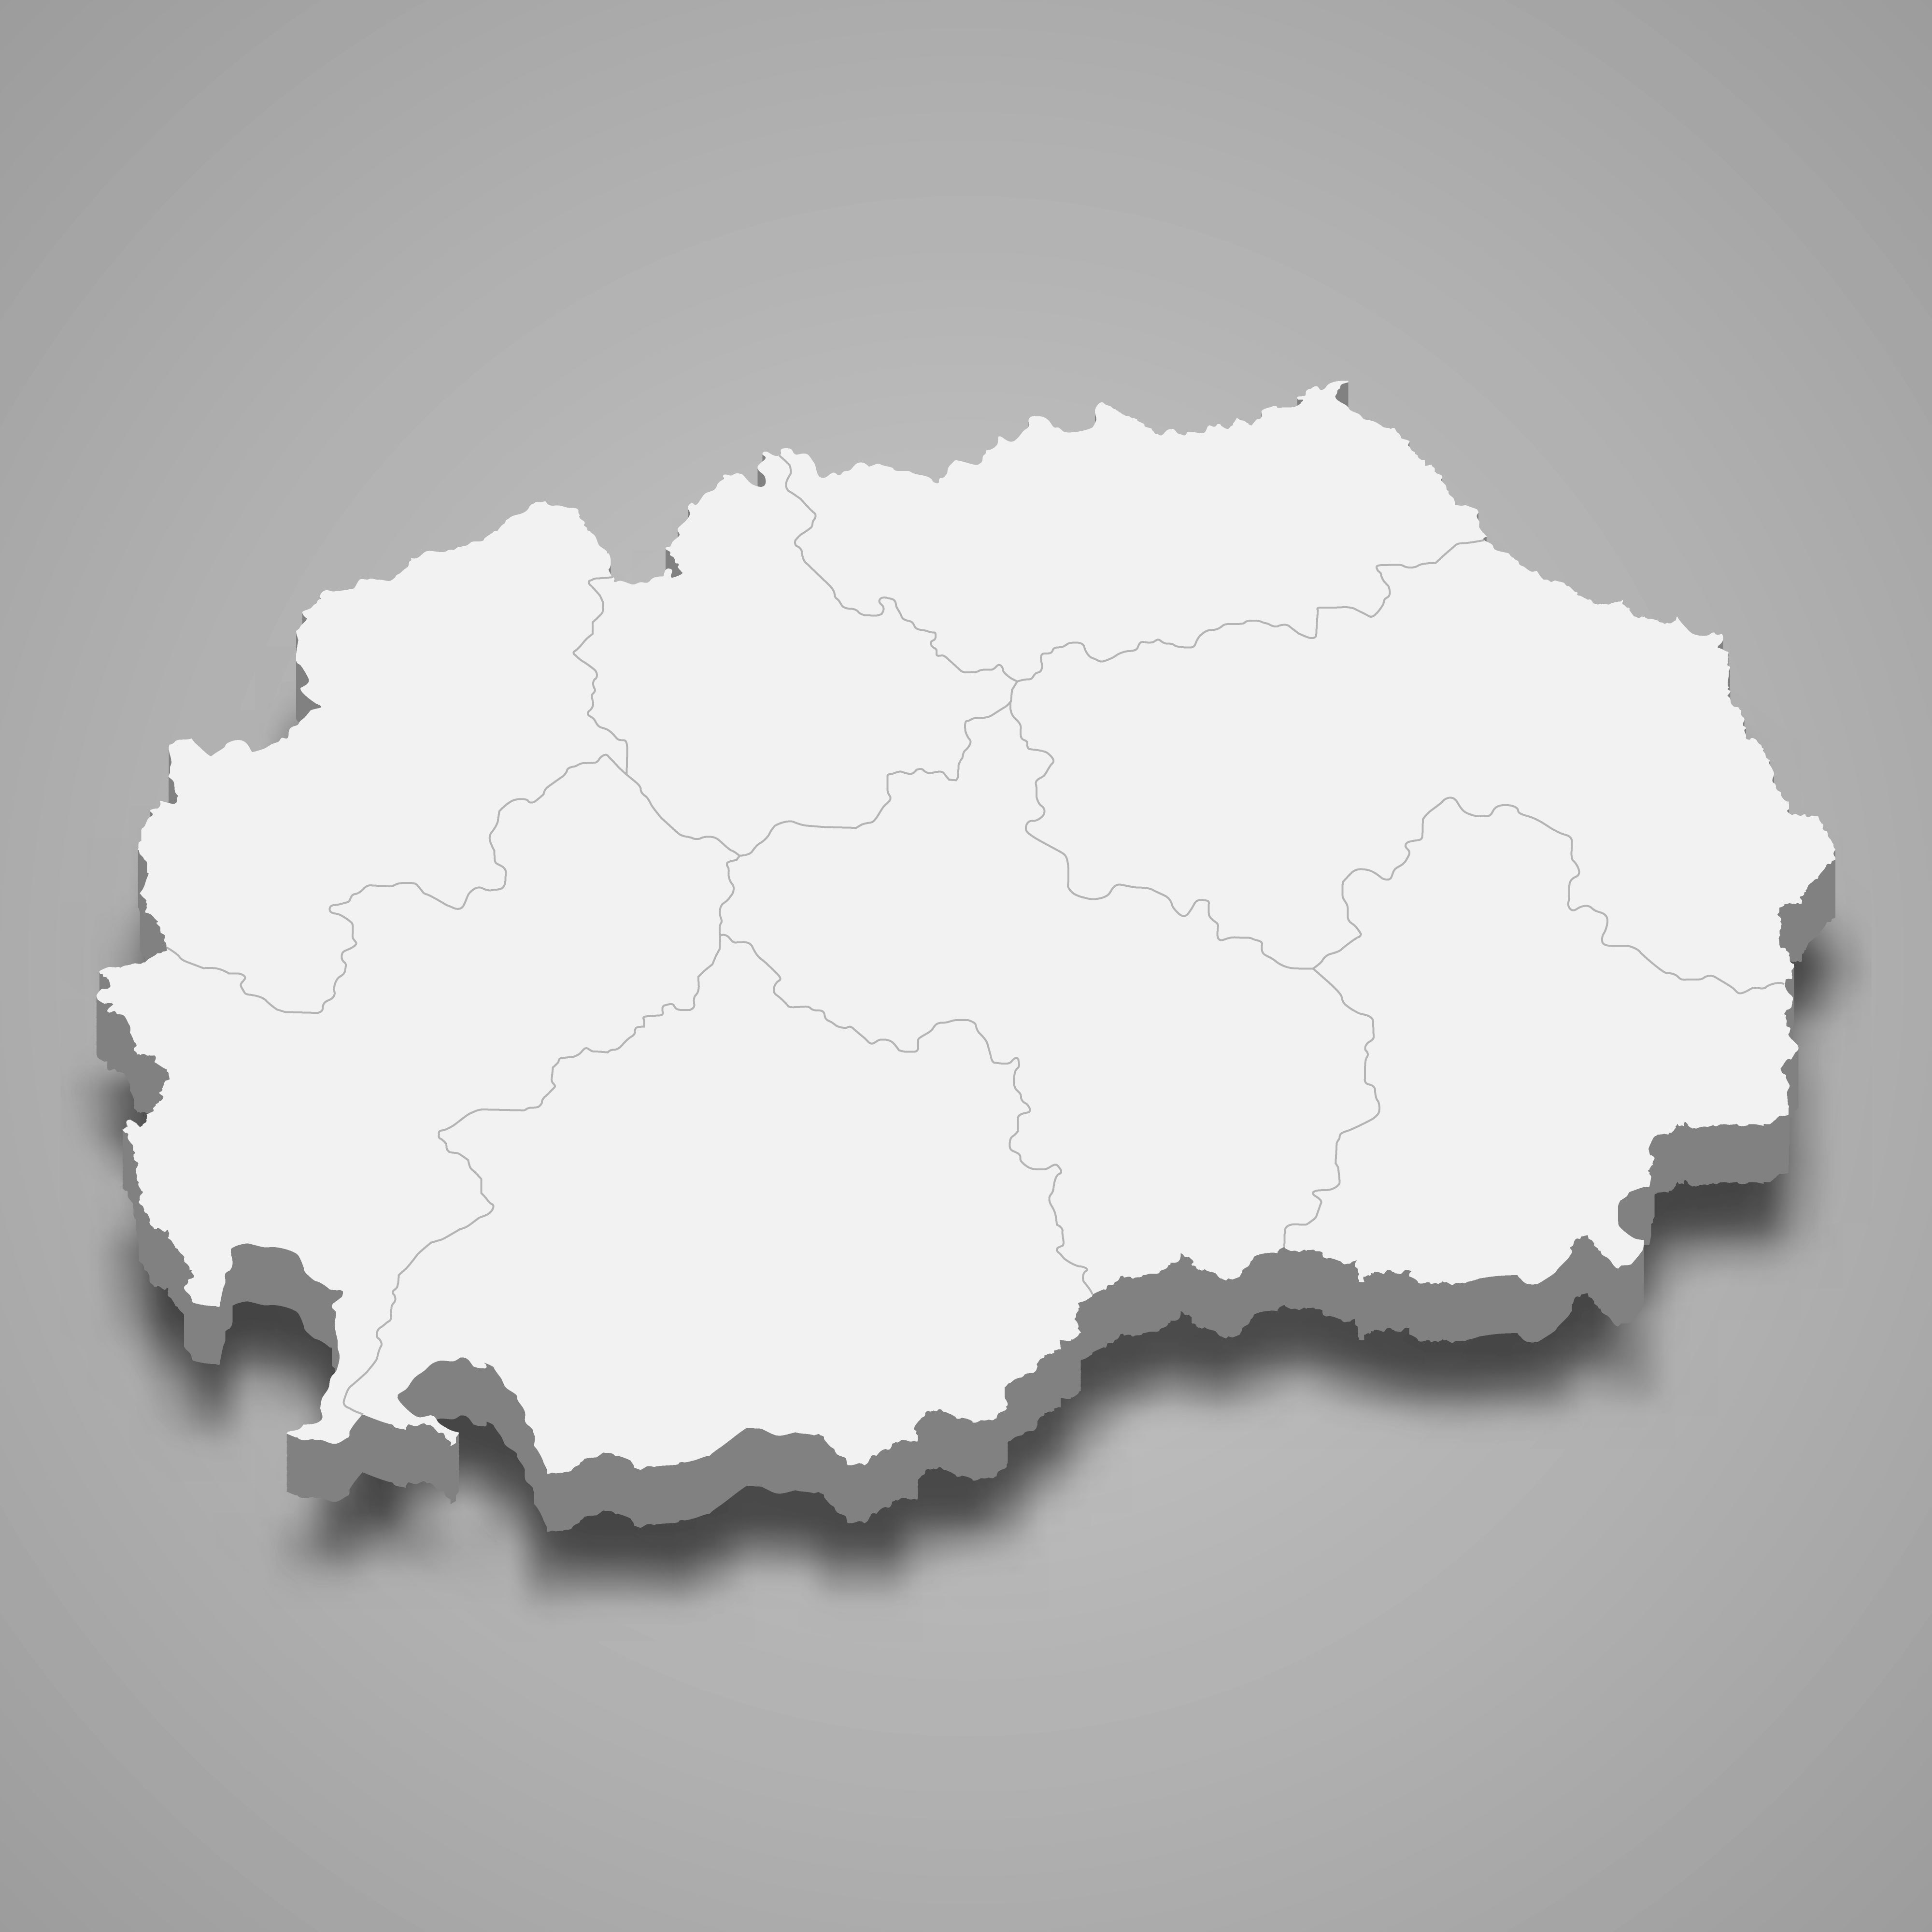 3d map of North Macedonia with borders of regions. 3d map with borders Template for your design